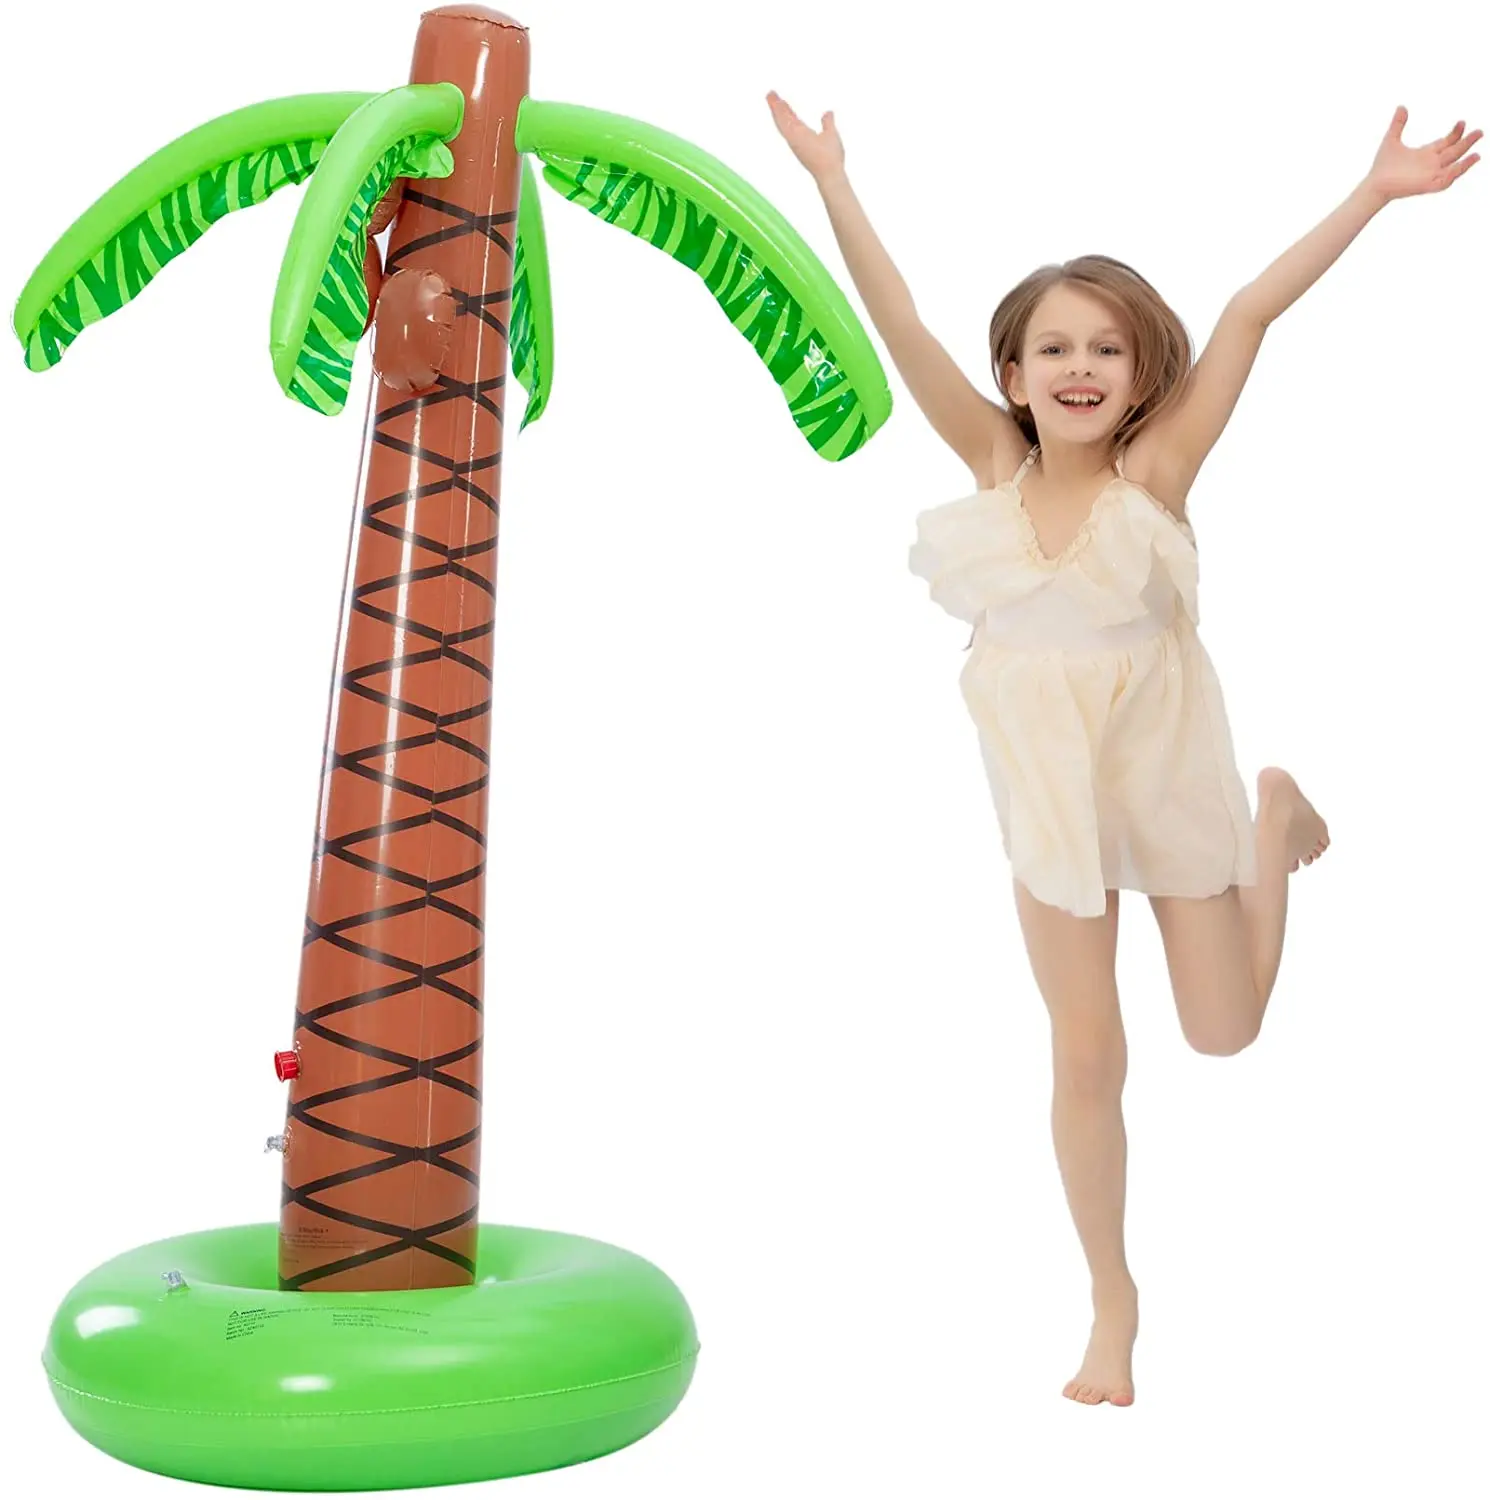 

Inflatable Palm Tree Backyard Sprinkler Toy for Kid Inflatable Water Park Outdoor Hawaiian Party Coconut Tree for Lawn Splash, Customized color